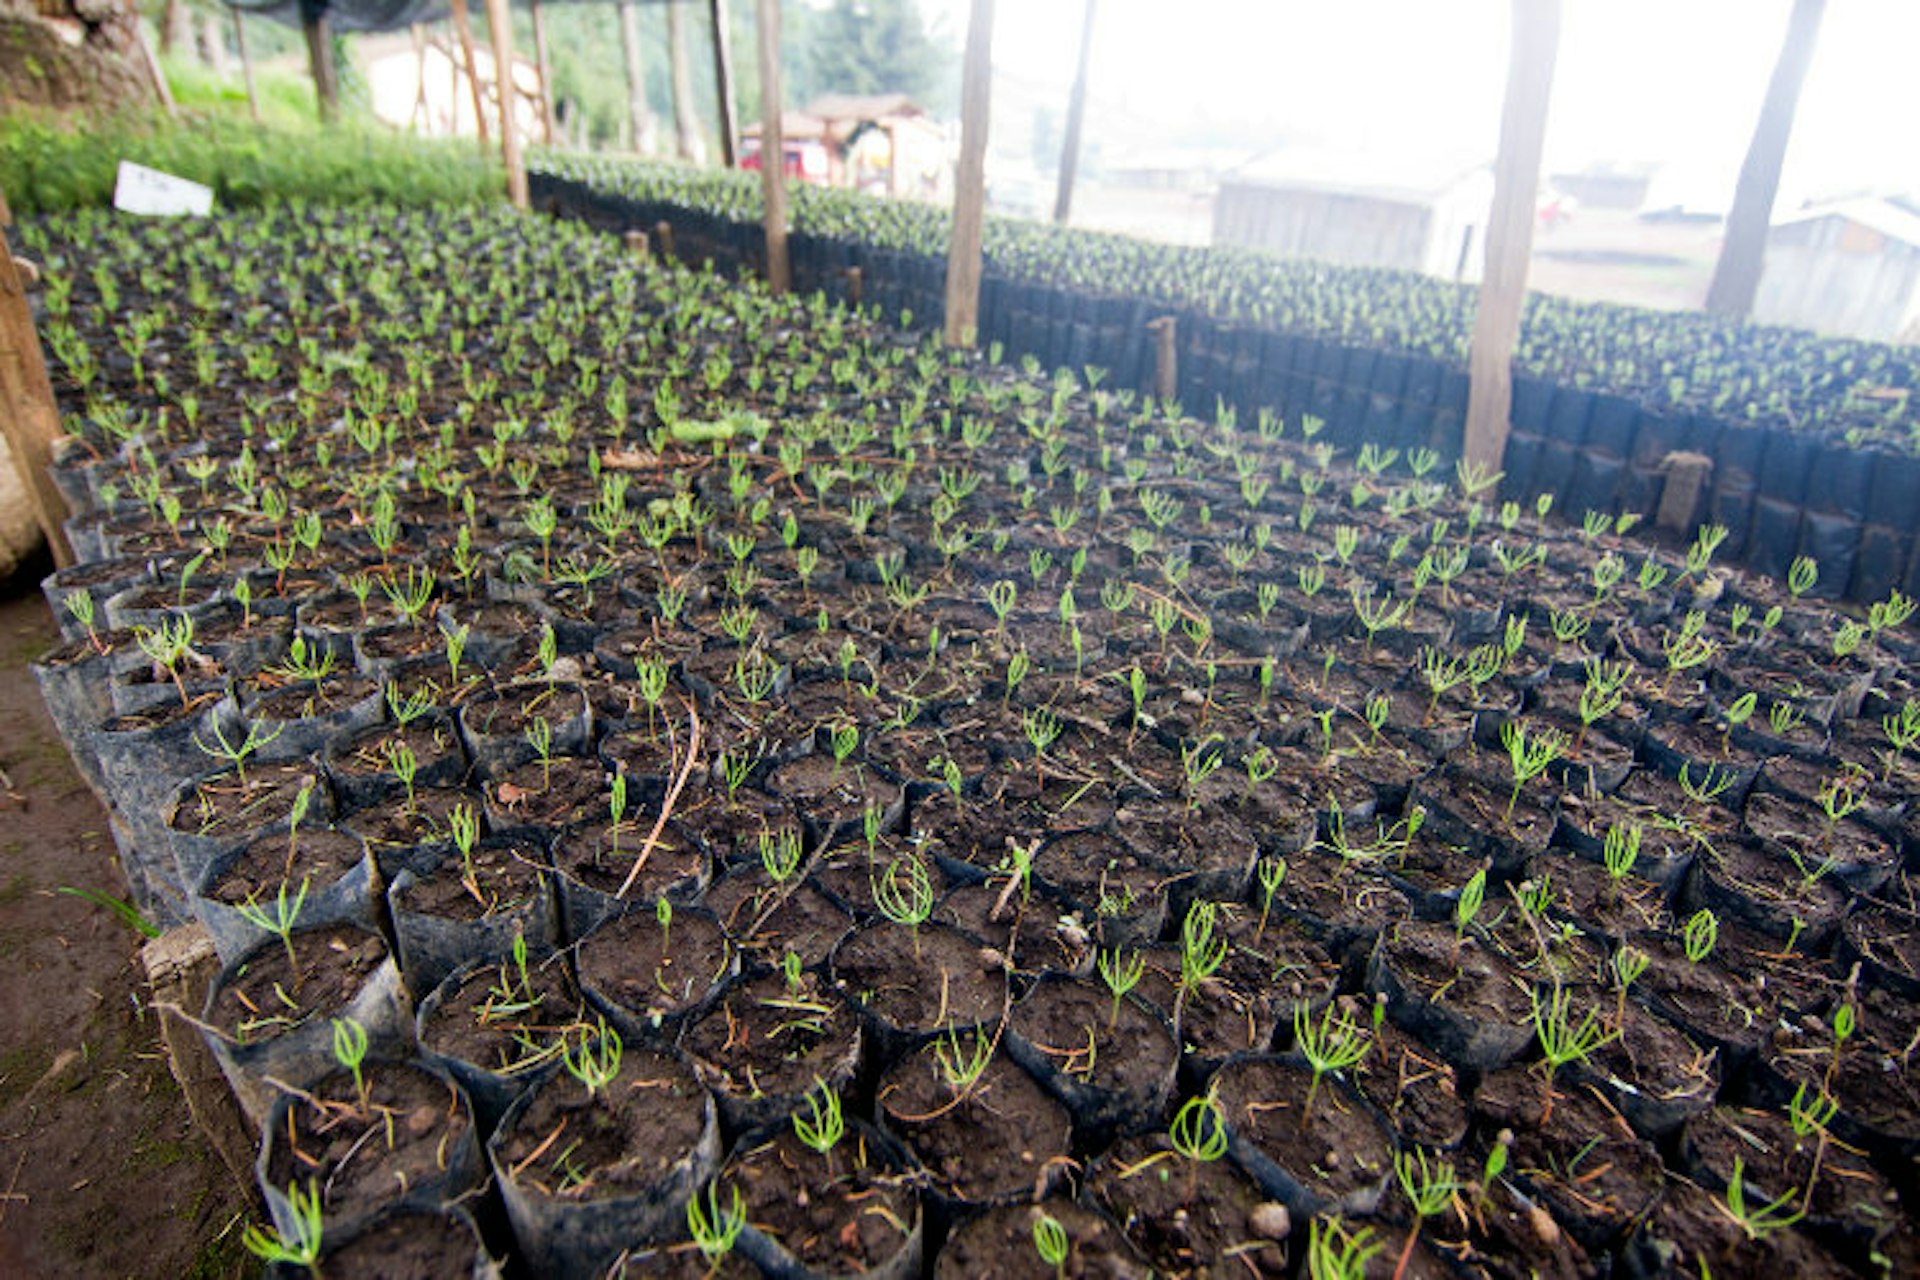 The forests of the El Rosario sanctuary suffered from serious de-forestation issues in the past, but with increased environmental awareness and the money generated through butterfly tourism, locals have established tree planting schemes and nurseries such as this one. Image by Stuart Butler / Lonely Planet